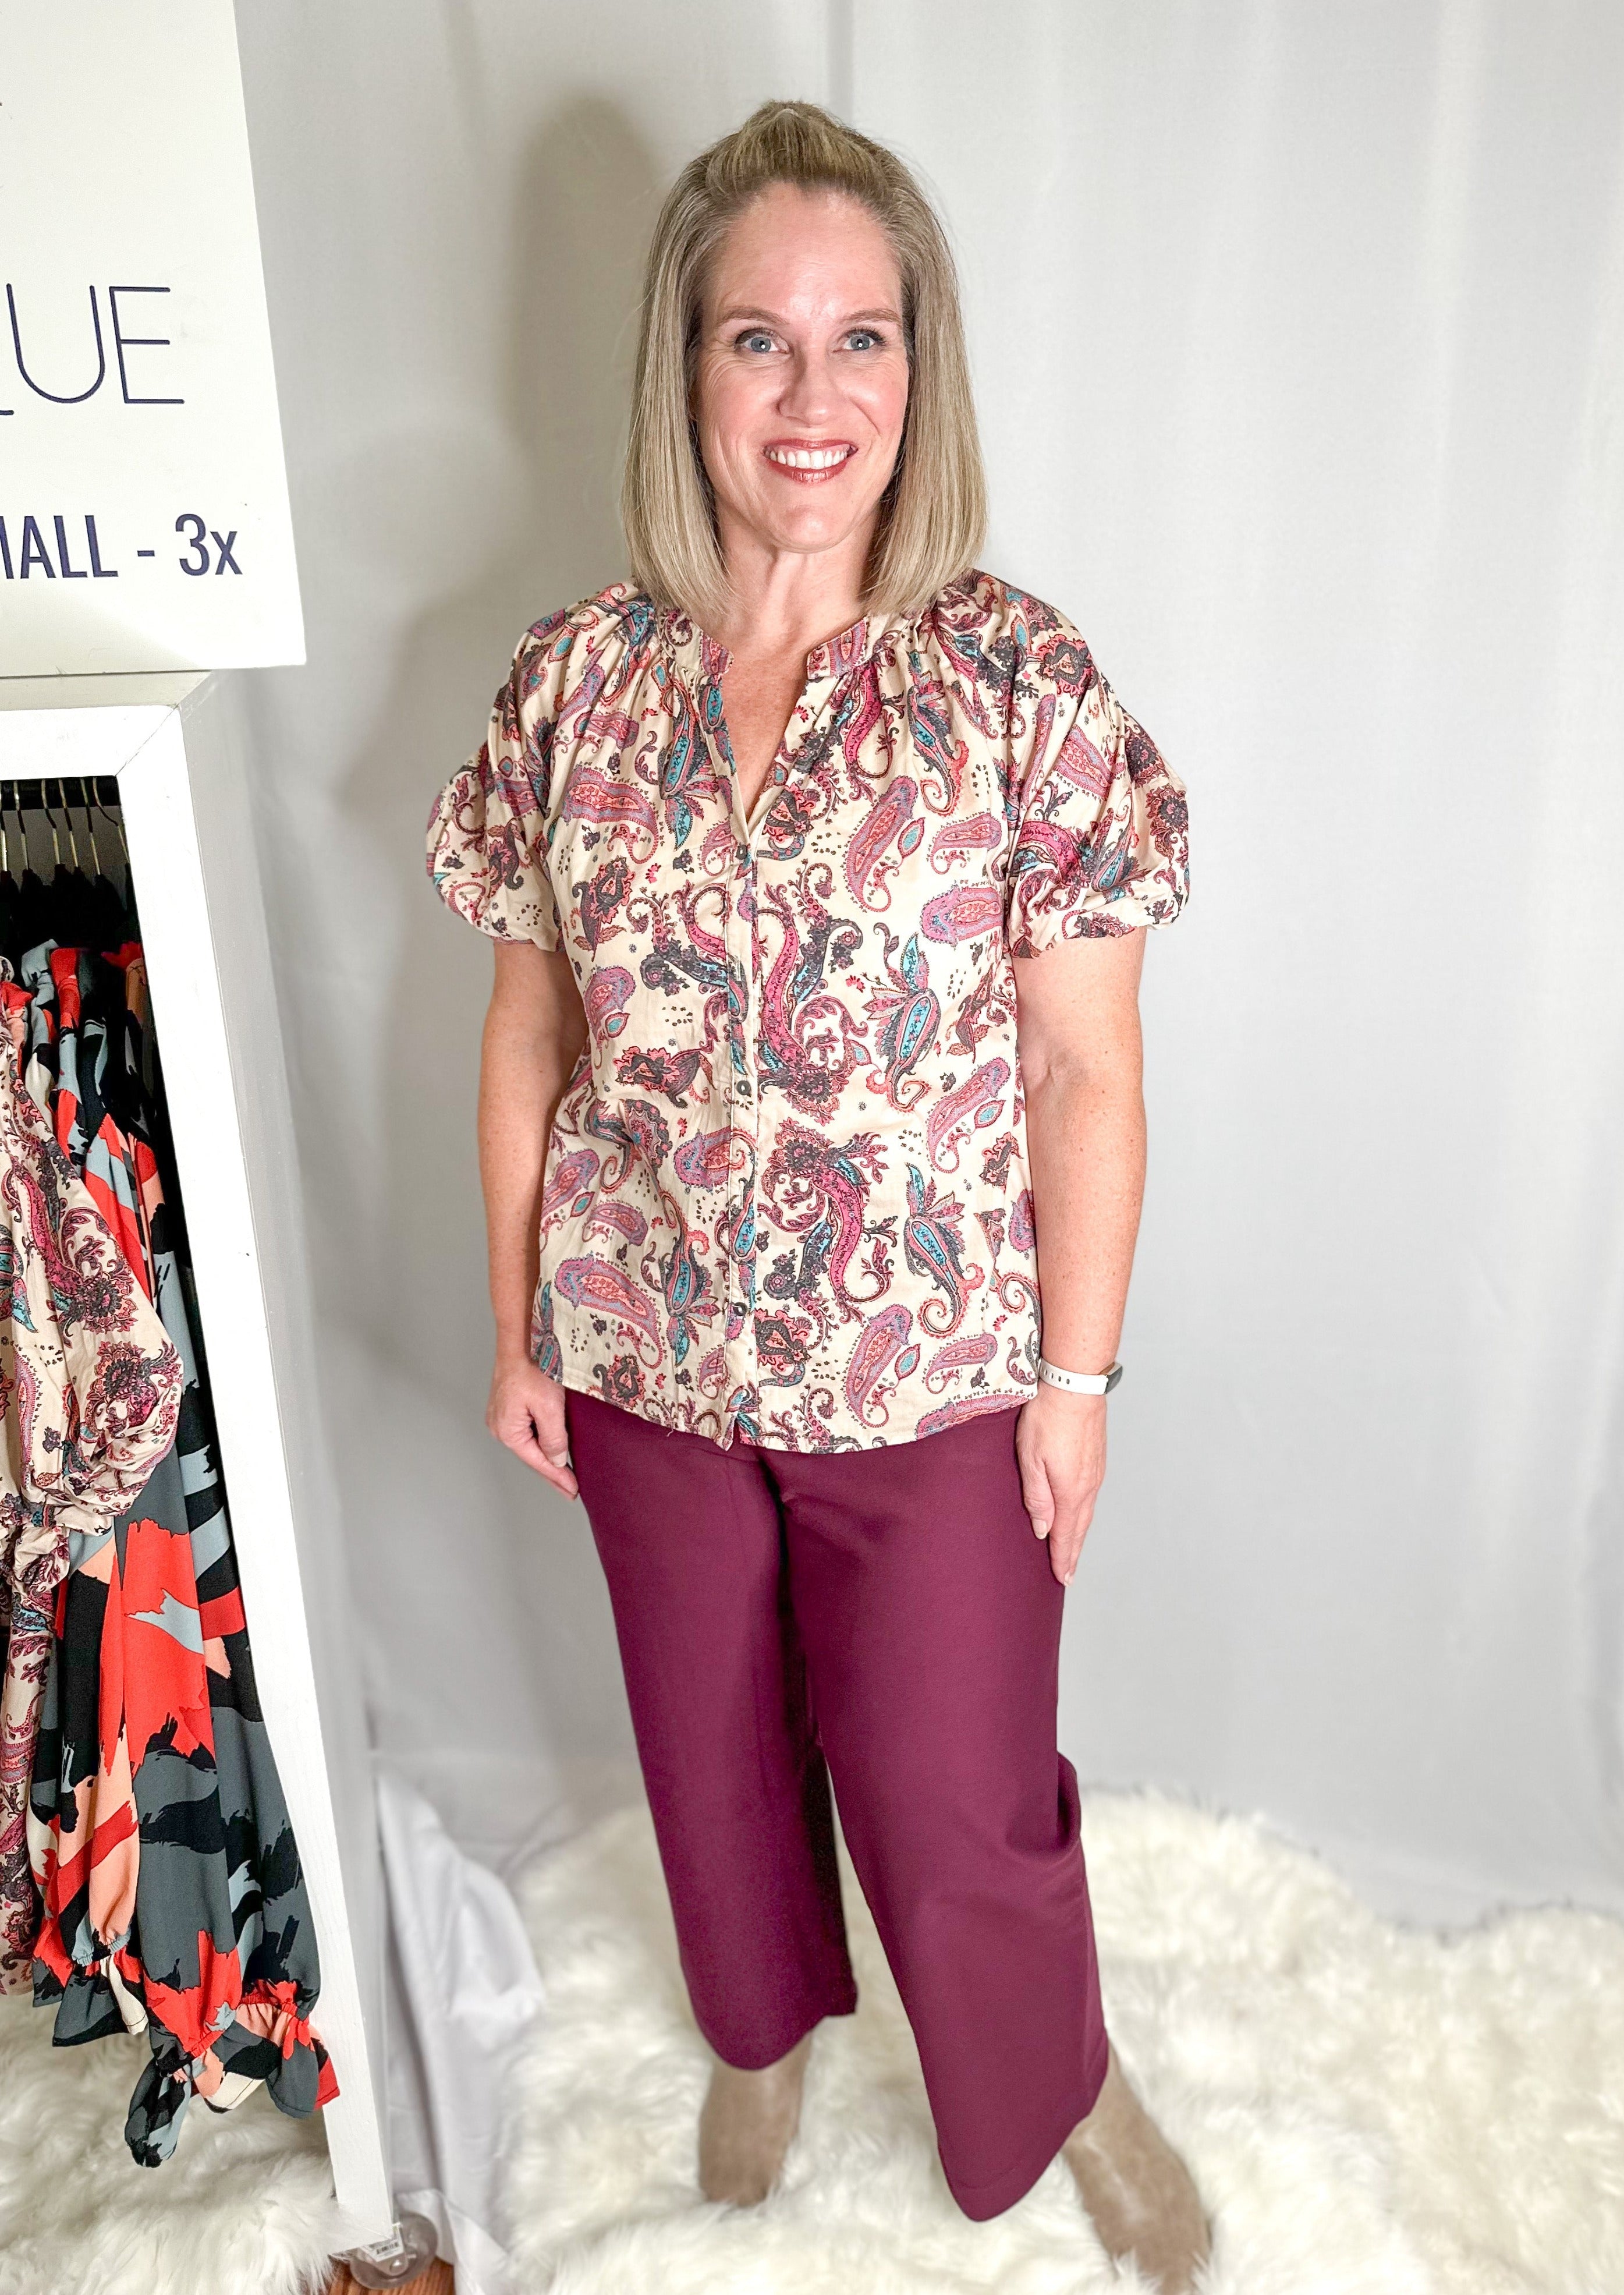 Cropped pants in the color wine paired with our taupe button down top.